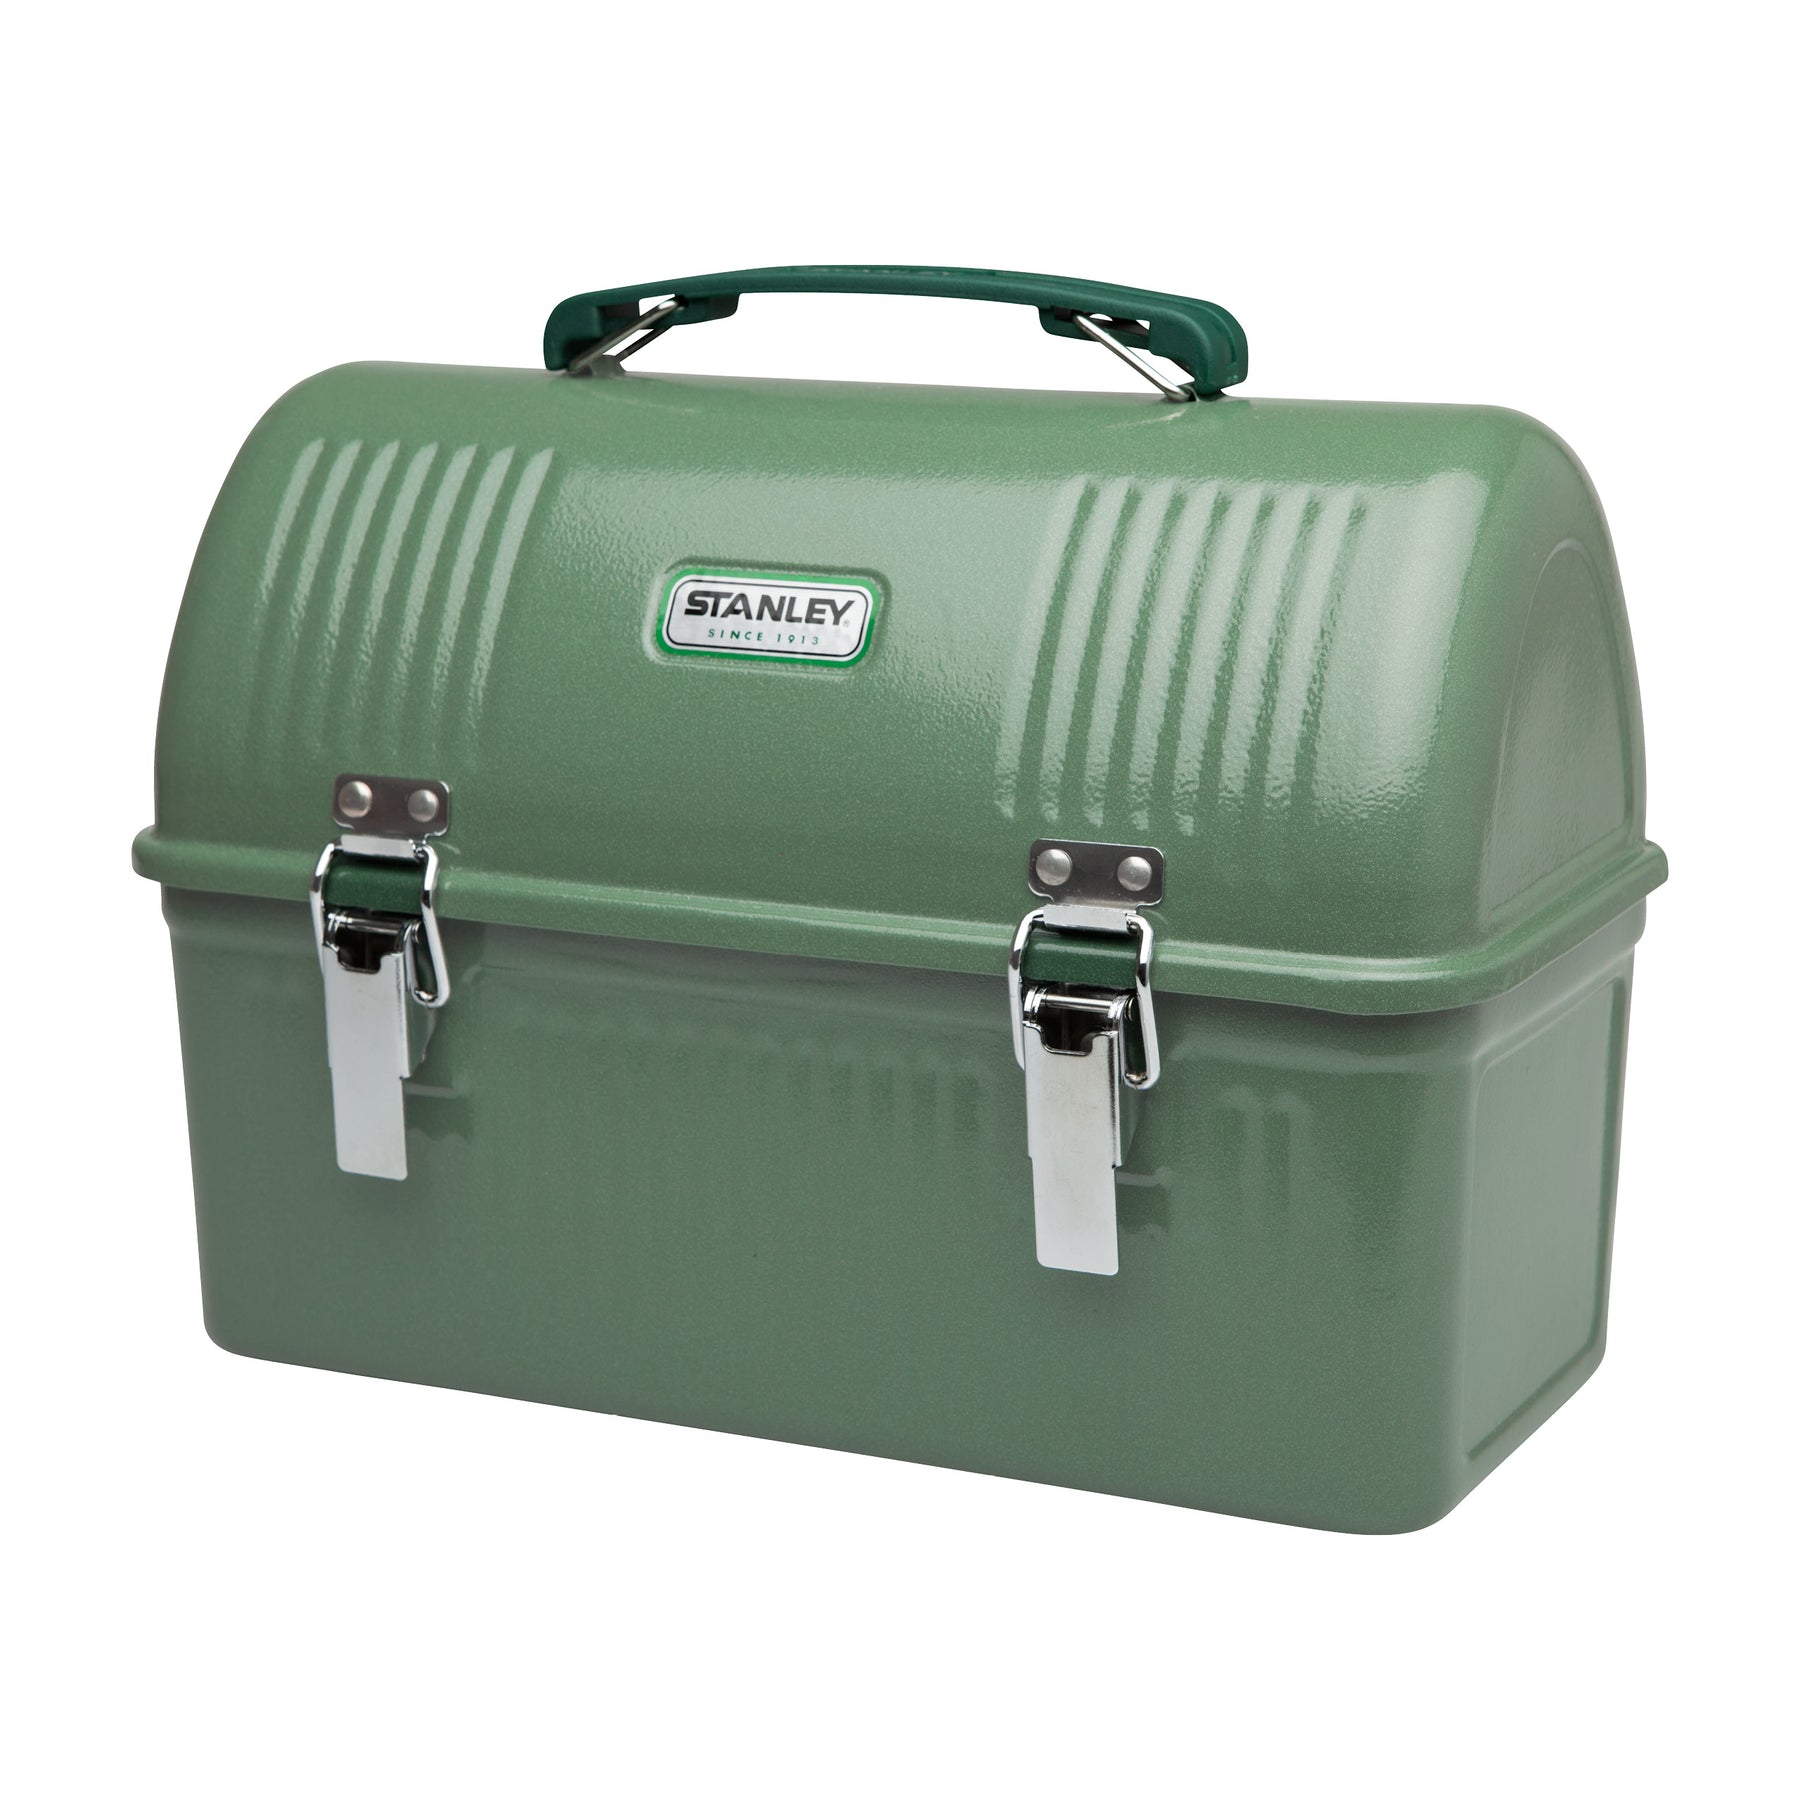 STANLEY USEFUL CLASSIC BOX, 1.2L for sandwiches, snacks, fishing or just  stuff!